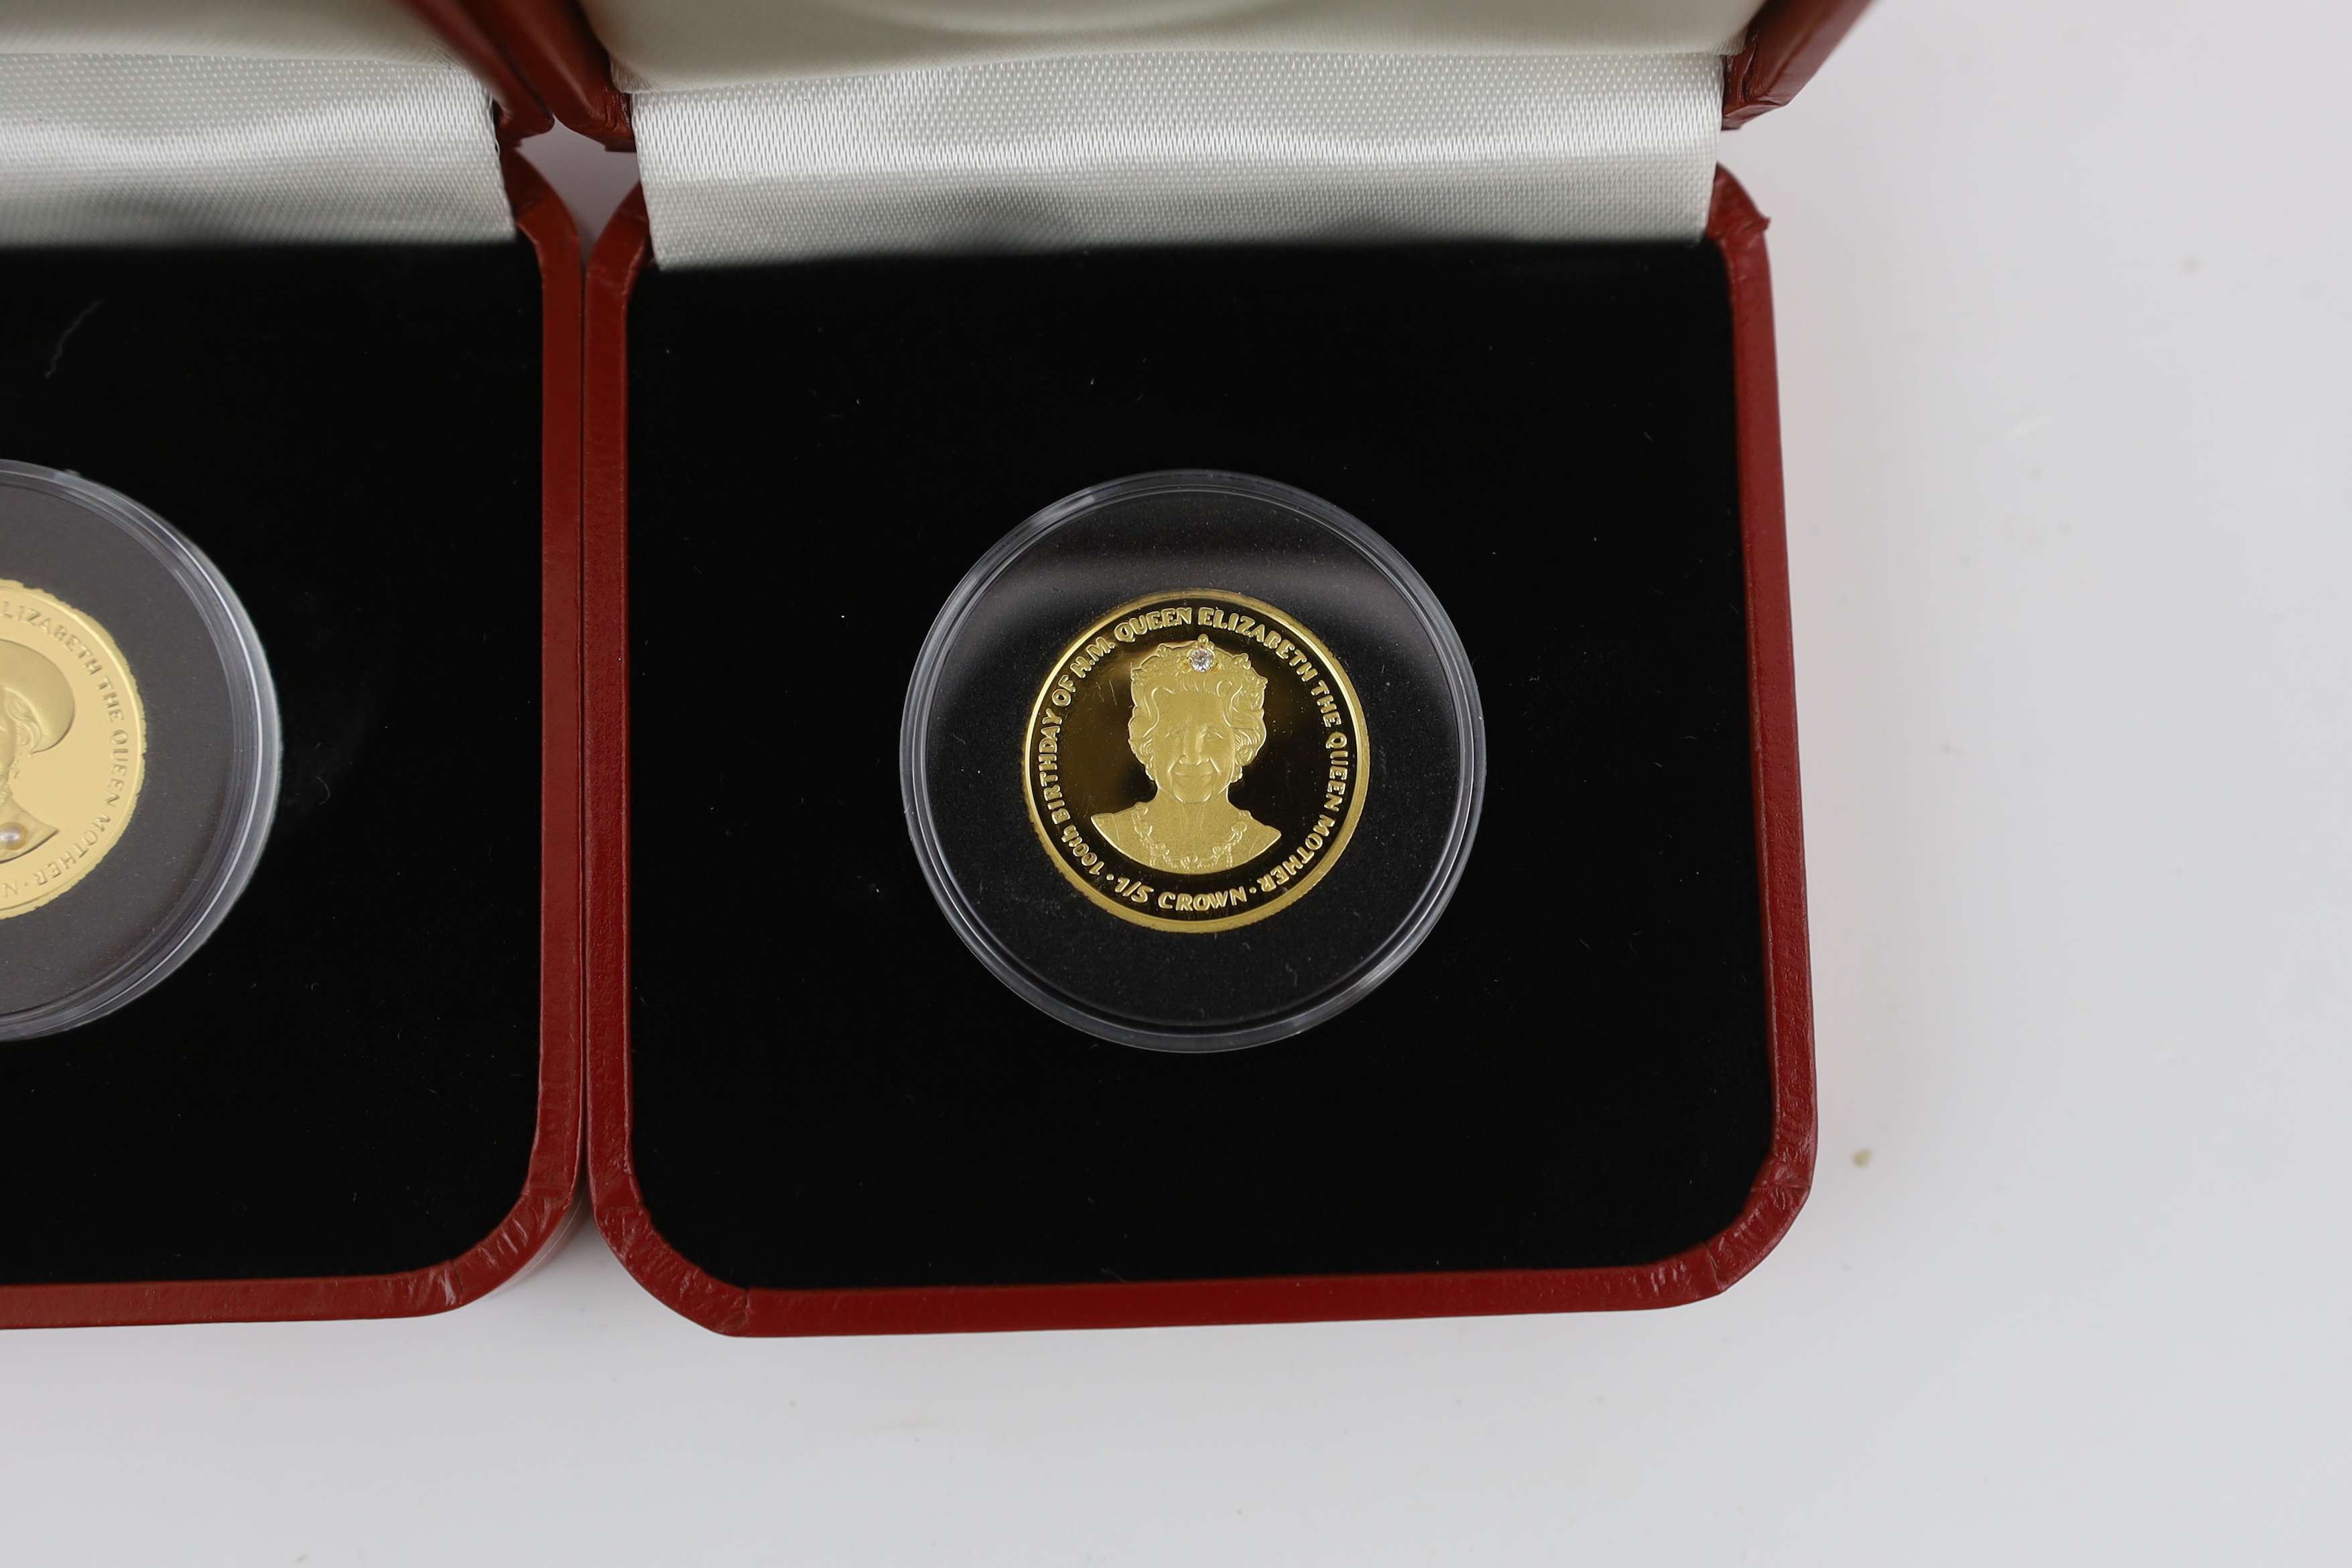 Gold coins - Two Pobjoy mint Isle of Man proof gold 1/5 crown coins, each 6.22g, 999.9/1000 purity - Image 3 of 5